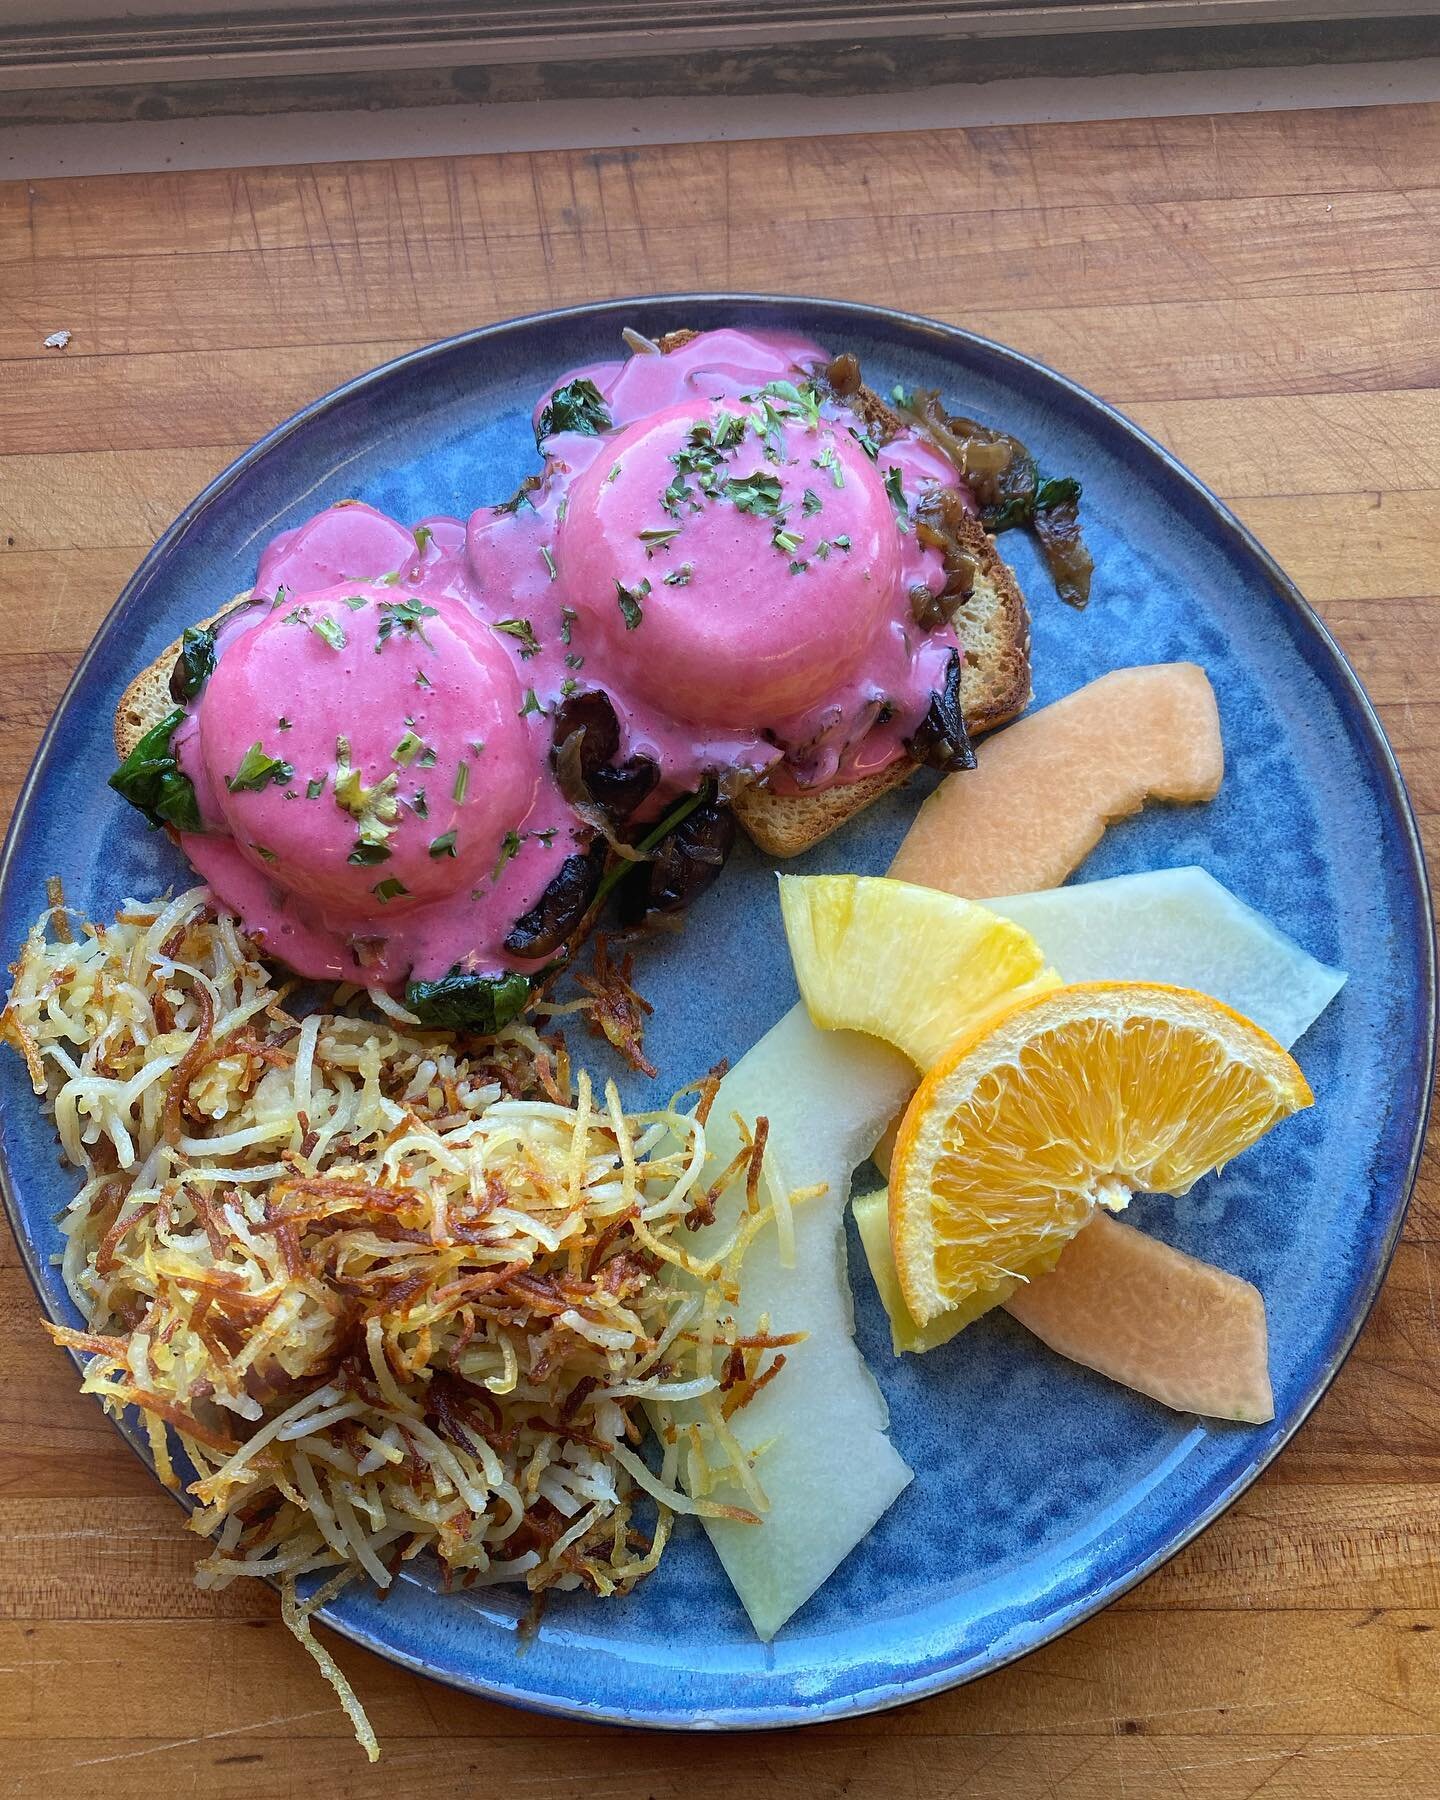 Food is our love language 💗

Beet pur&eacute;e hollandaise, poached eggs on sourdough. Open till 8PM for Valentines dinner. 

@visitstratfordon 
#love #valentines #vday #romance #pink #dinner #eggsbenedict #red